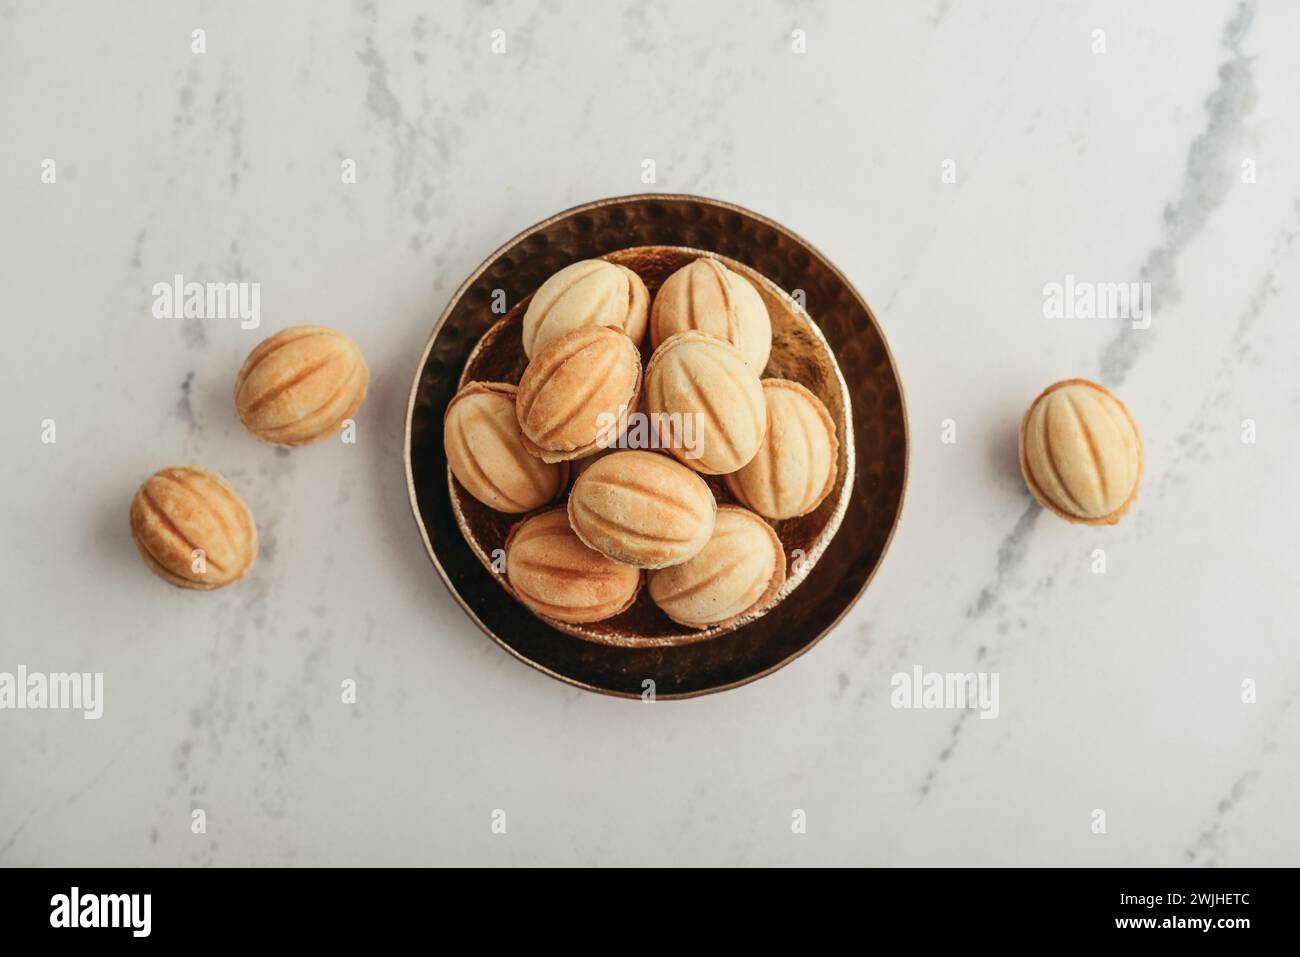 Homemade walnut shaped cookies with boiled condensed milk on white marble table, top view Stock Photo